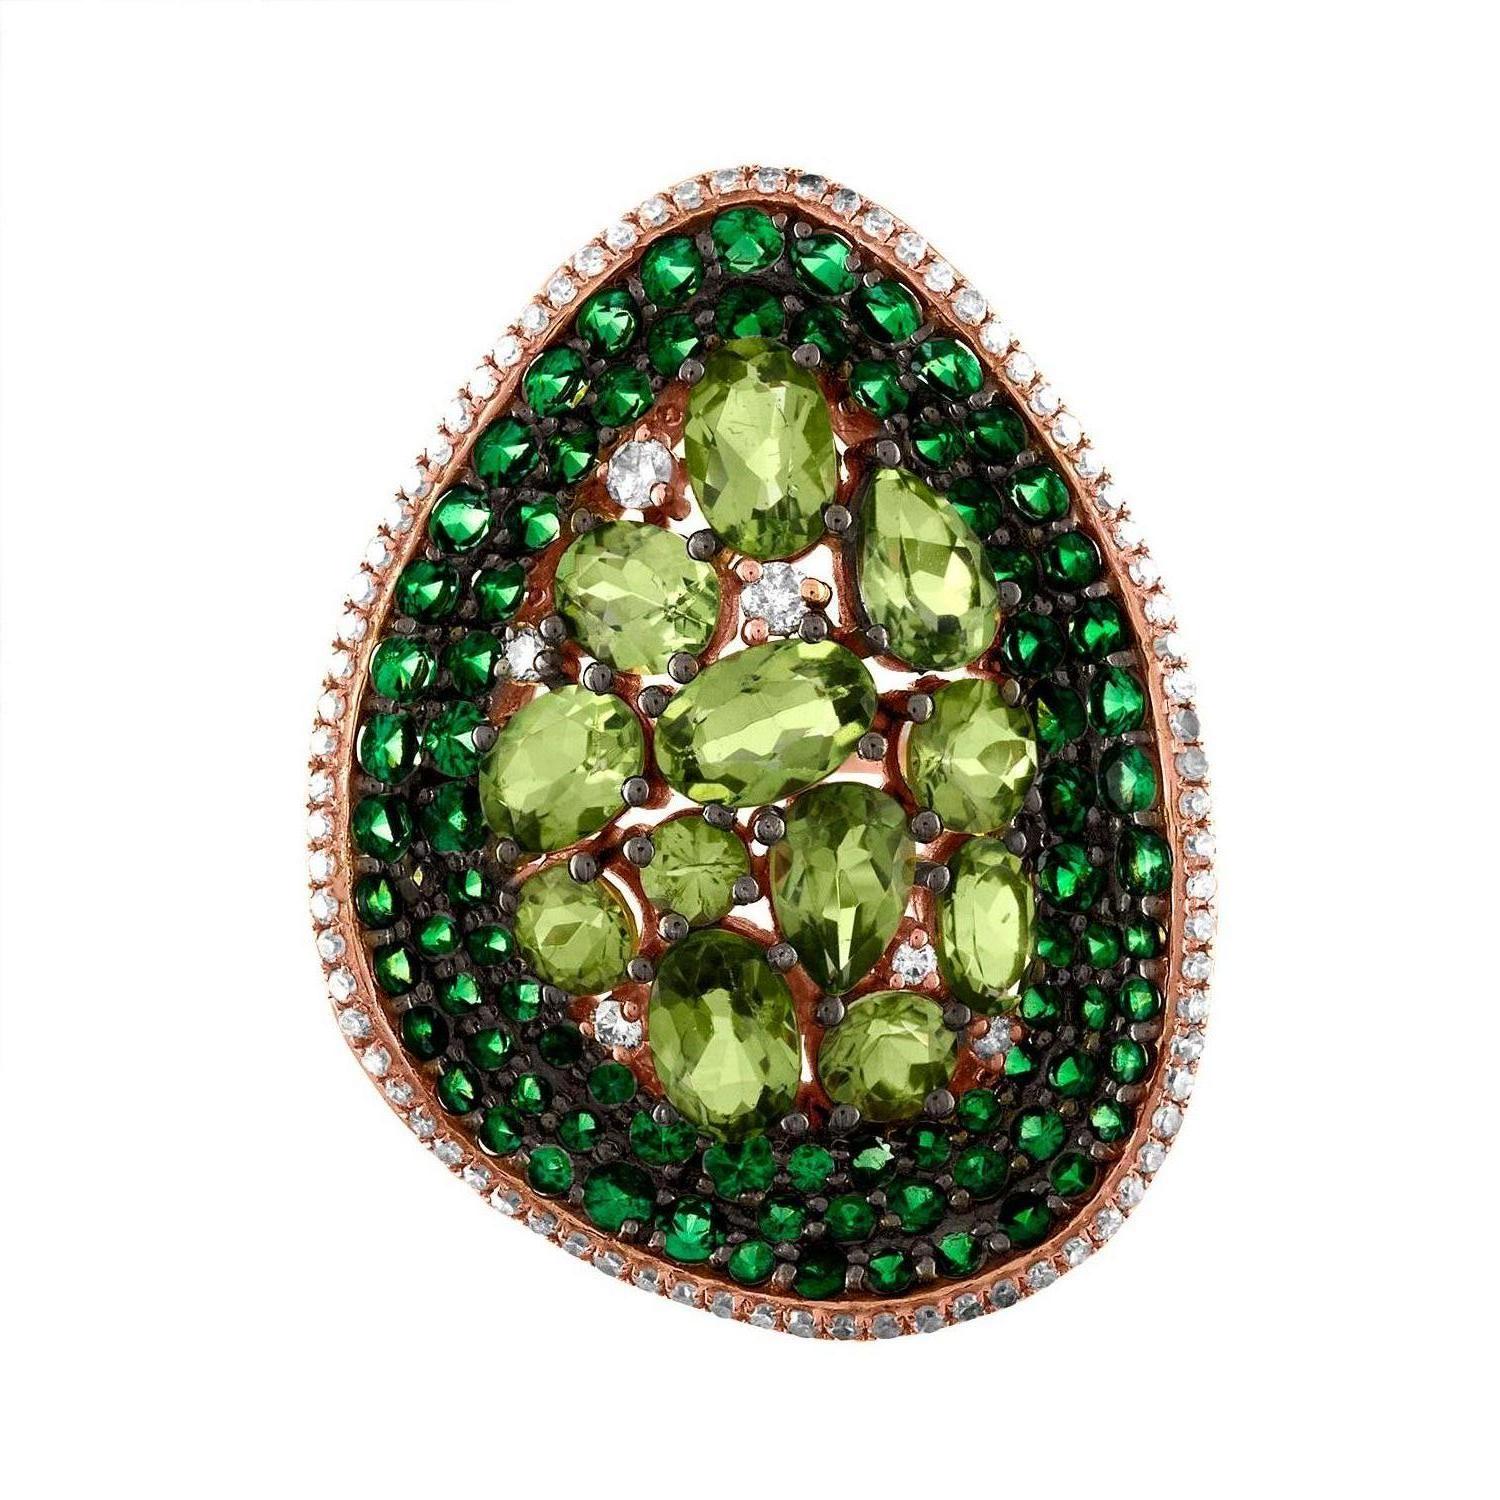 Beautiful & Fun Ring
The ring is 18K Rose Gold
There are 6.22 Carats in Tsavorite & Peridot
There are 0.45 Carats I SI Diamonds
The top of the ring measures 1.25